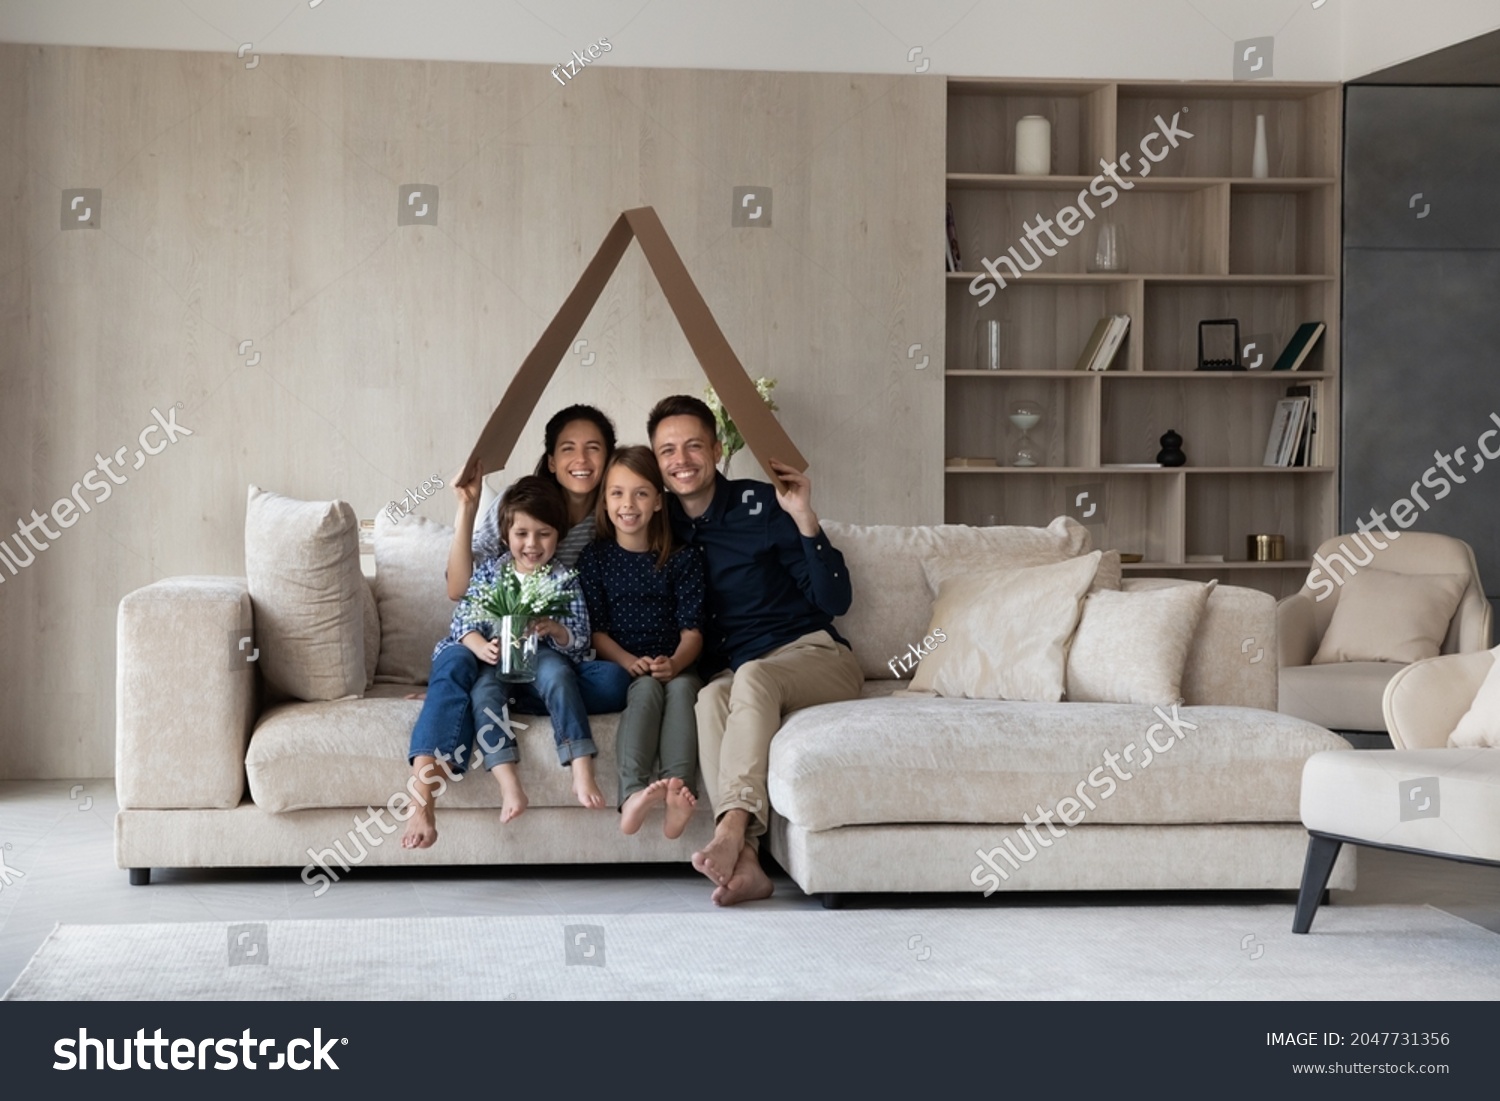 Full length joyful young married hispanic couple parents sitting with little children son daughter on comfortable couch under carton roof, celebrating moving into own dwelling, real estate concept. #2047731356